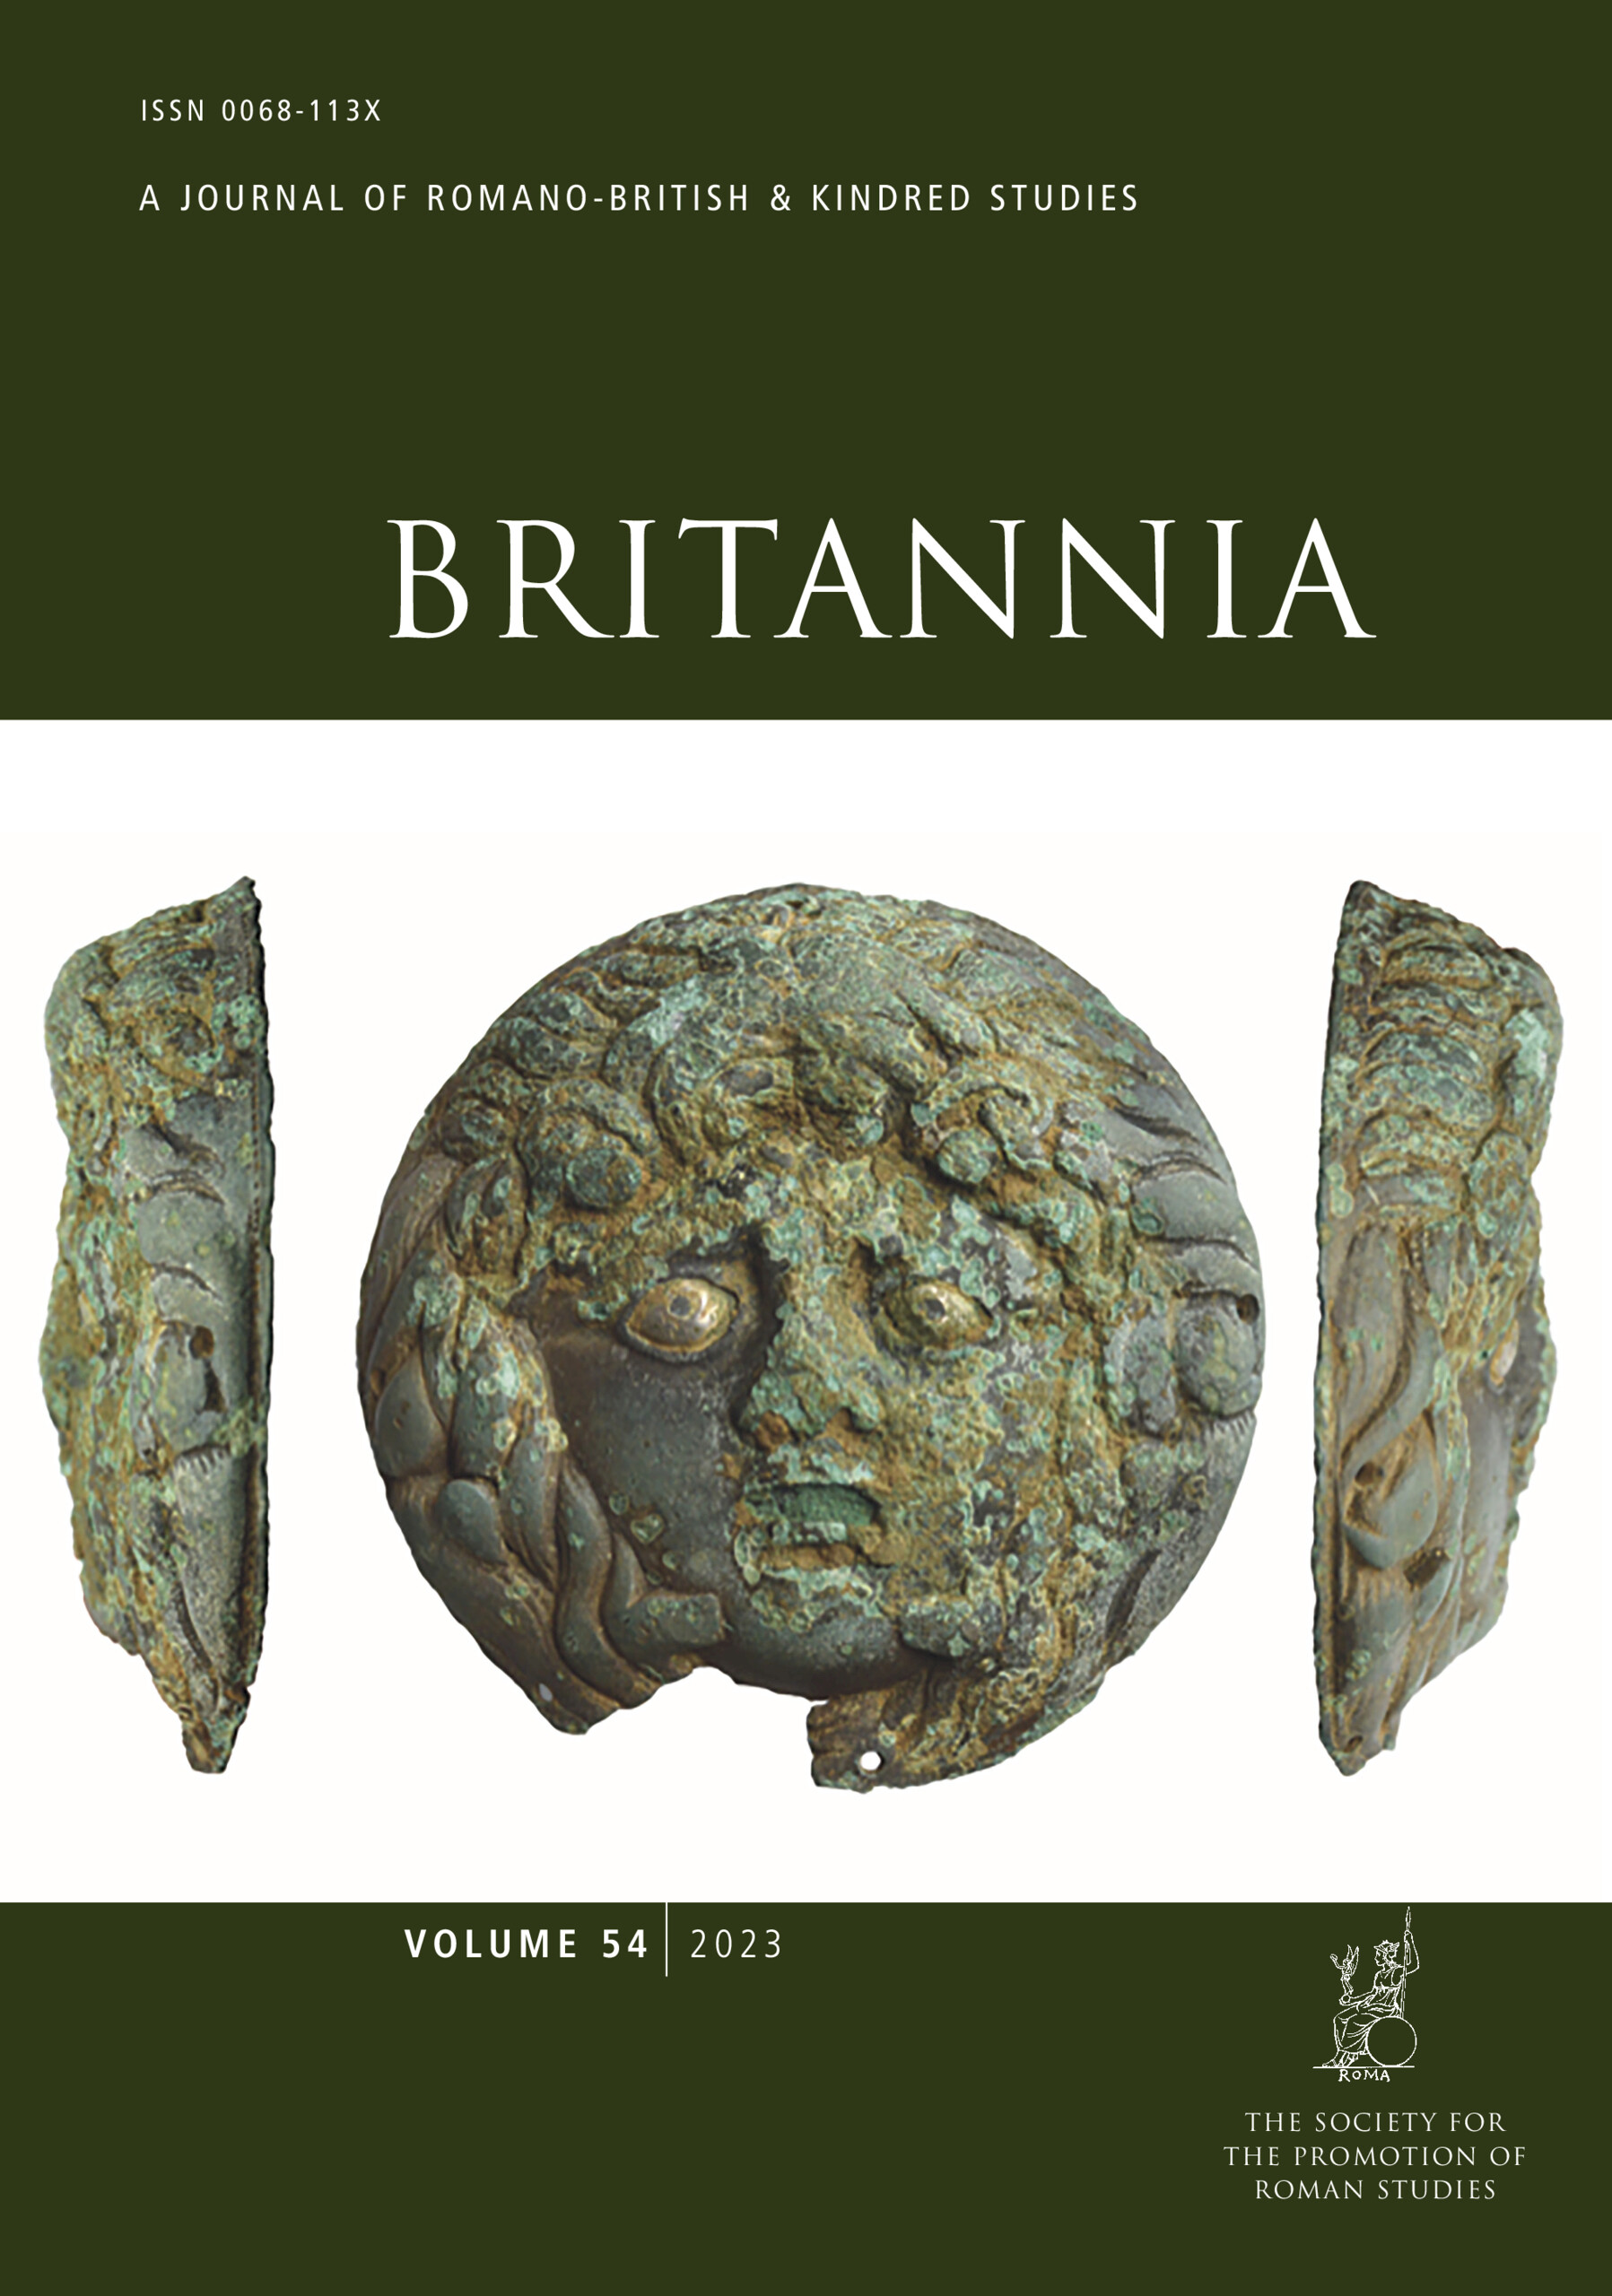 Bears and Coins: The Iconography of Protection in Late Roman Infant Burials | Britannia | Cambridge Core